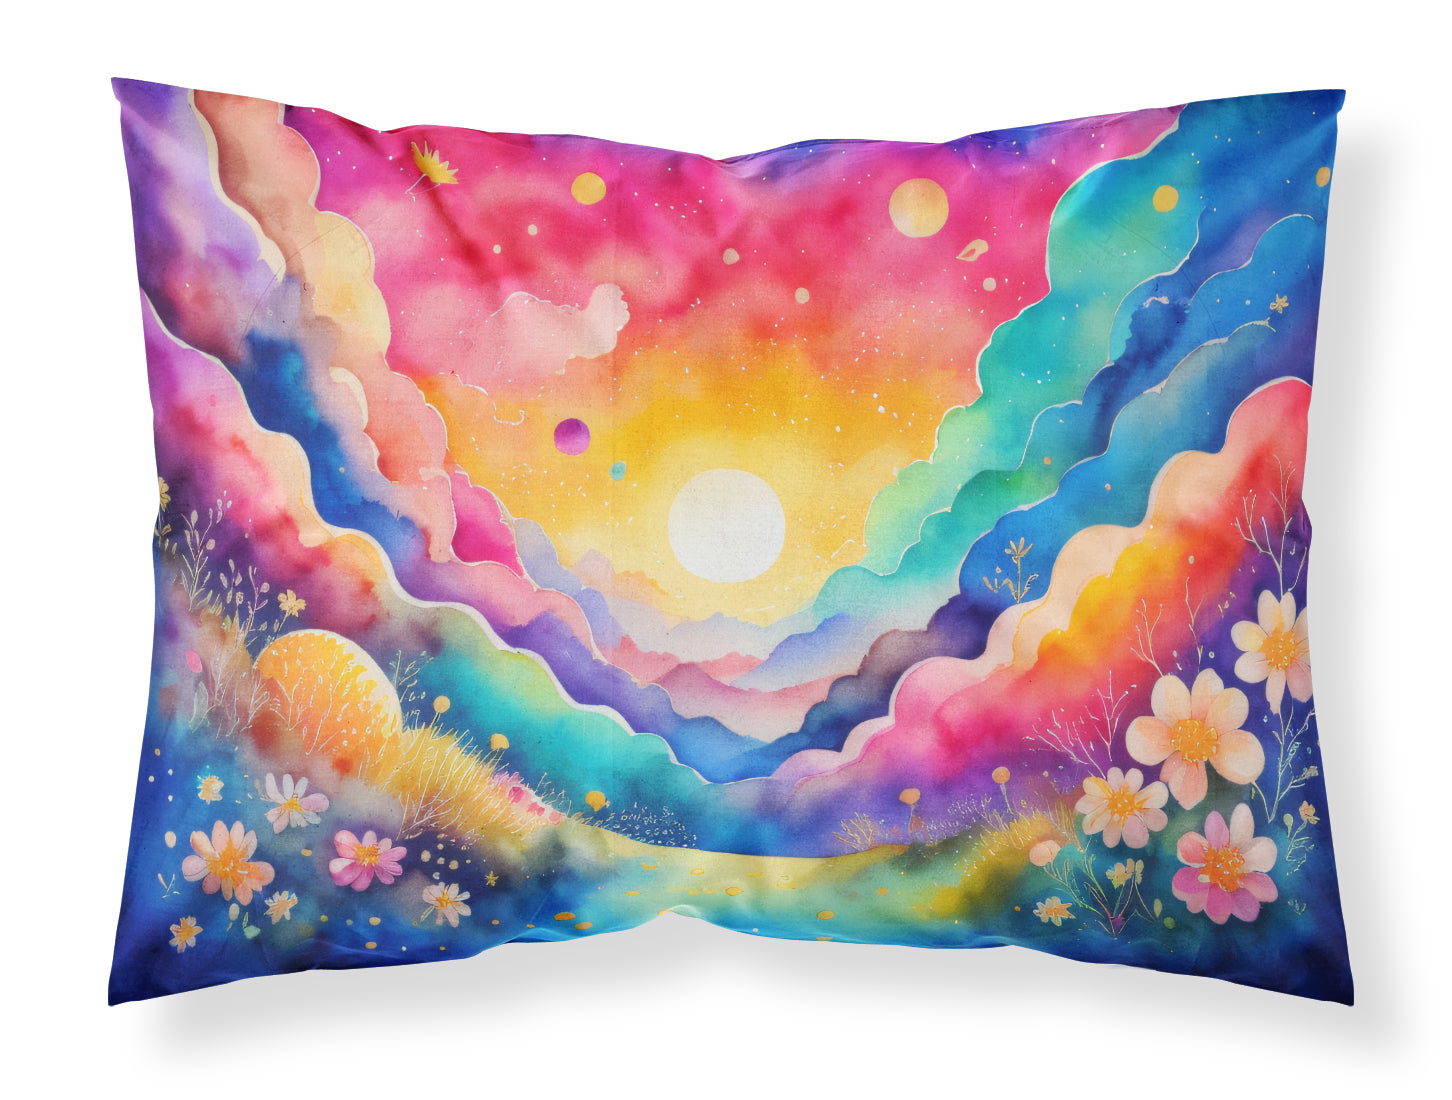 Buy this Stock, or Gillyflower in Color Fabric Standard Pillowcase